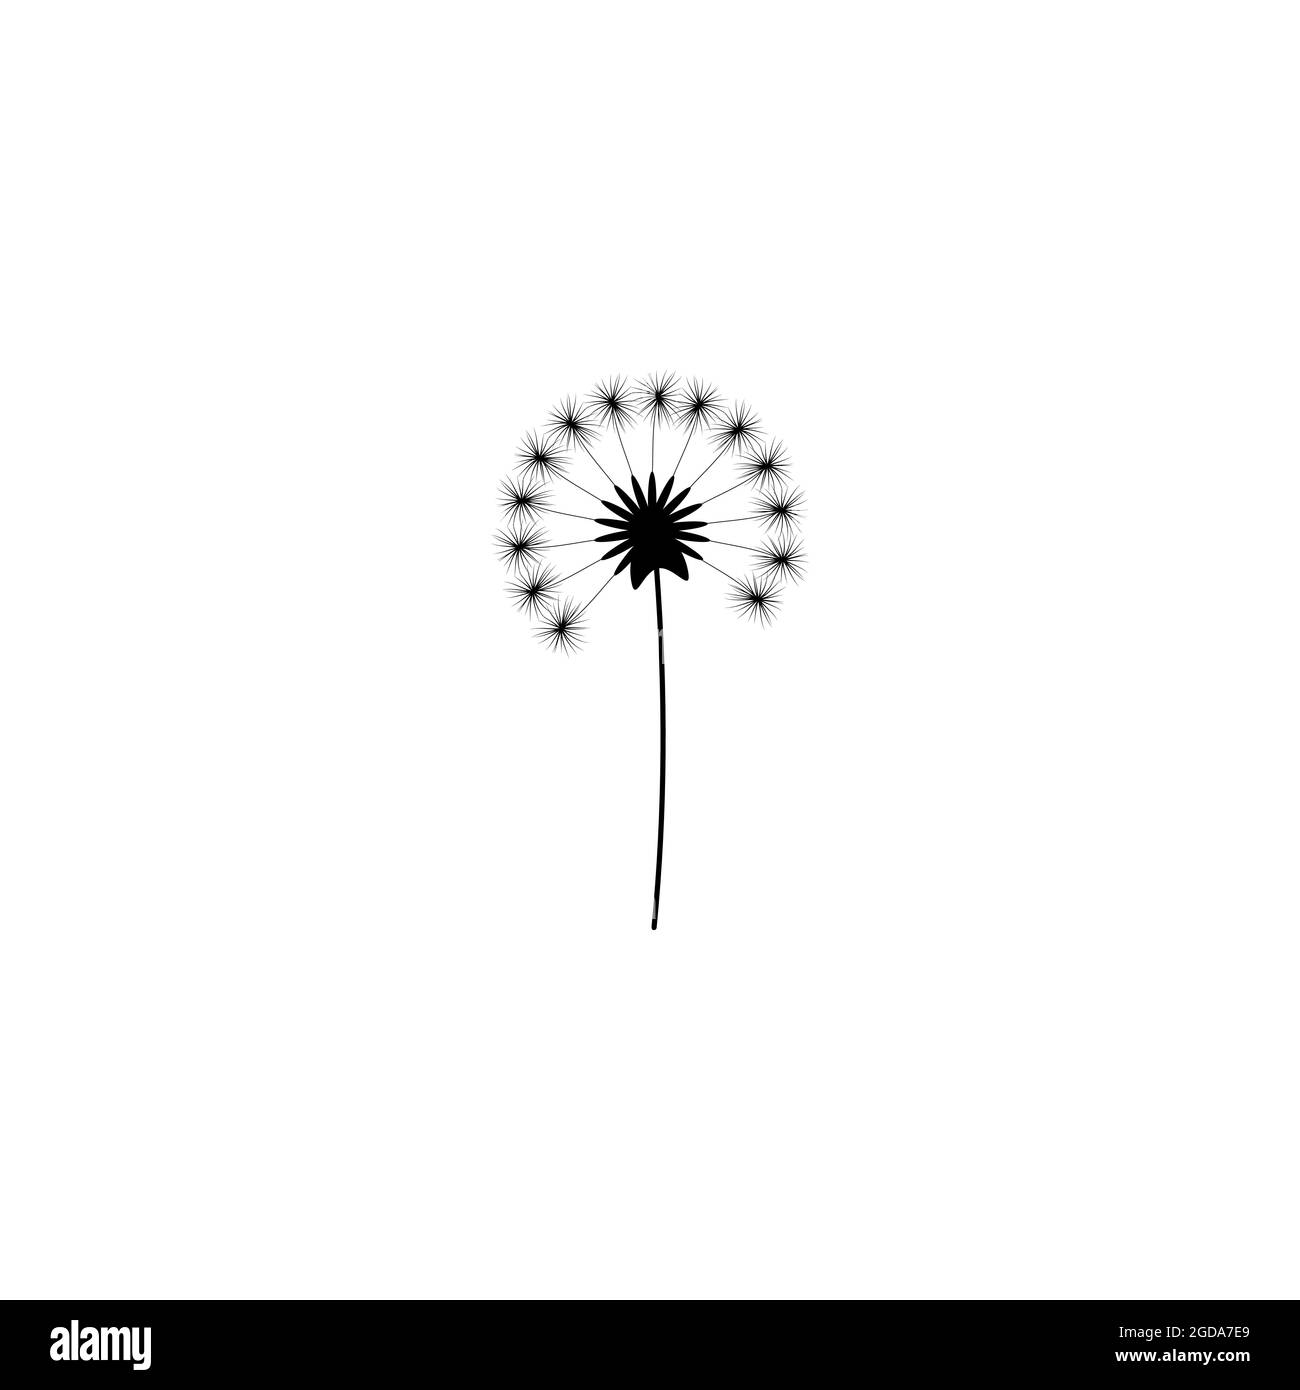 Black flat icon of dandelion flower with curved sprig. Big Bloom with big shabby petals. Isolated on white. Vector illustration. Eco style. Nature sym Stock Vector